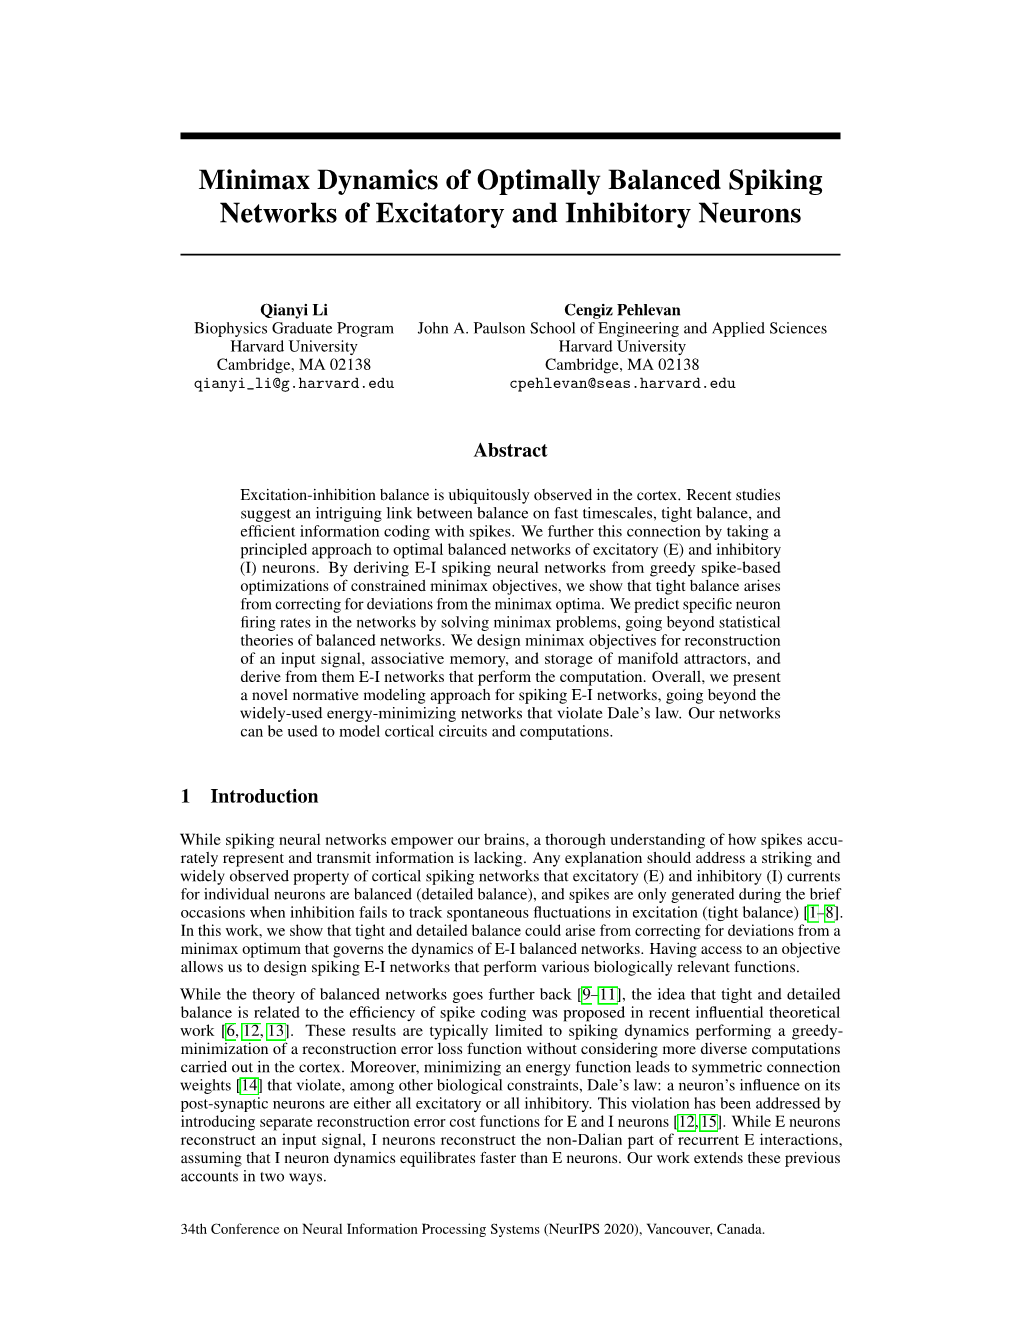 Minimax Dynamics of Optimally Balanced Spiking Networks of Excitatory and Inhibitory Neurons